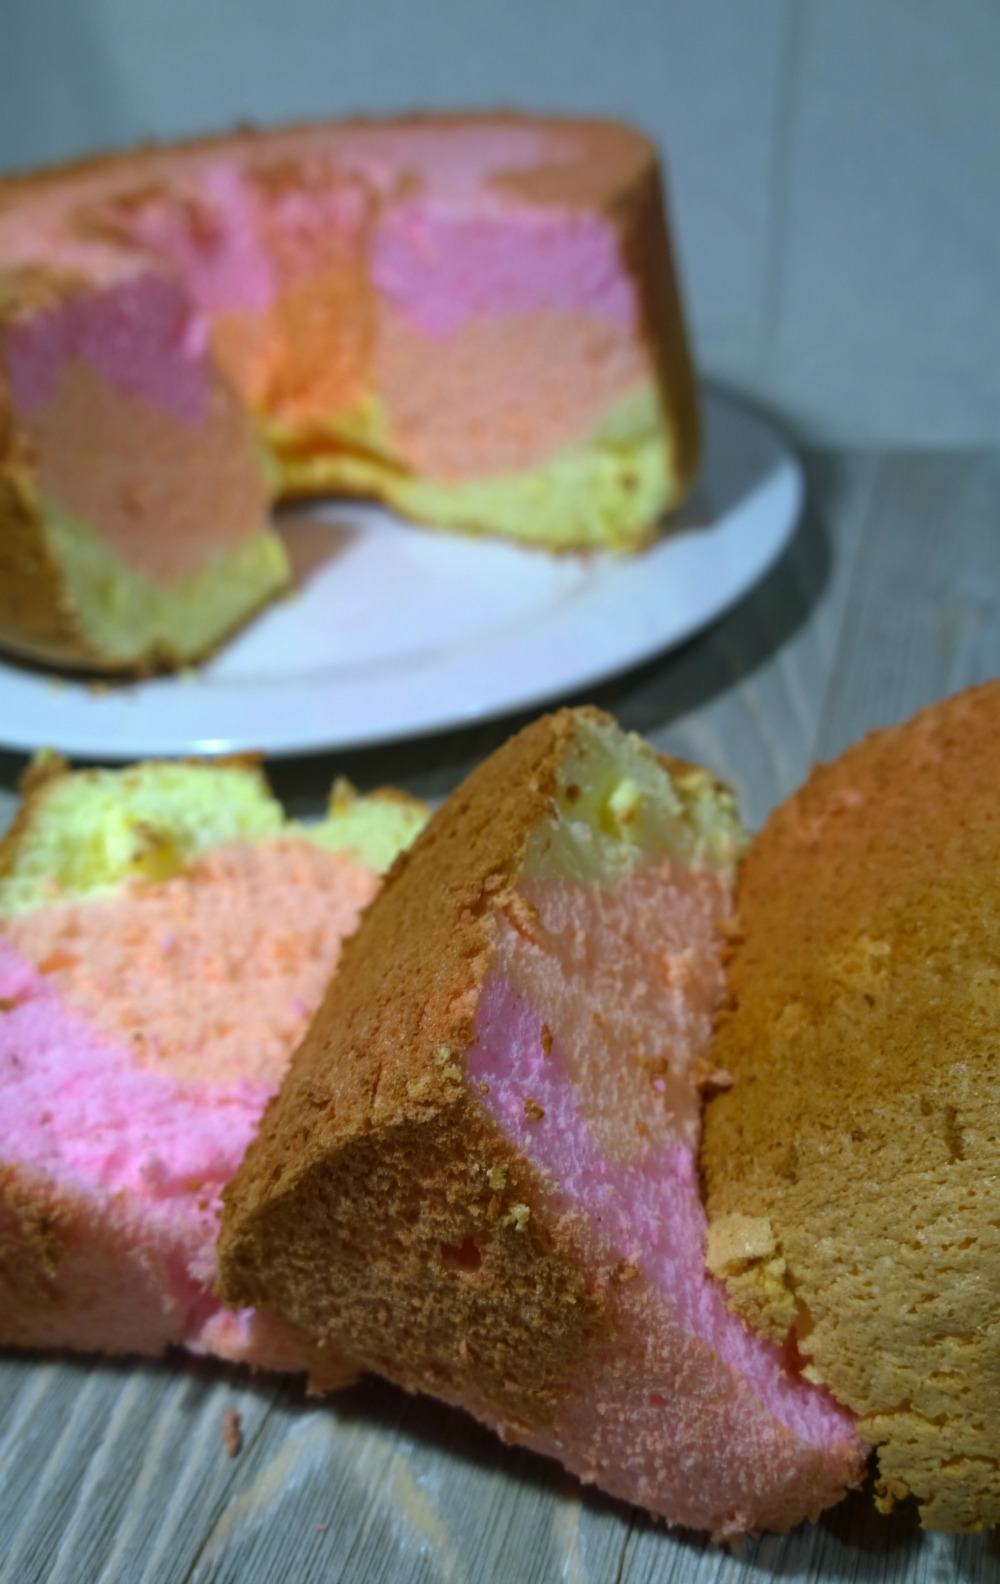 Layered Angel Food Cake with Tropical Flavors and Colors